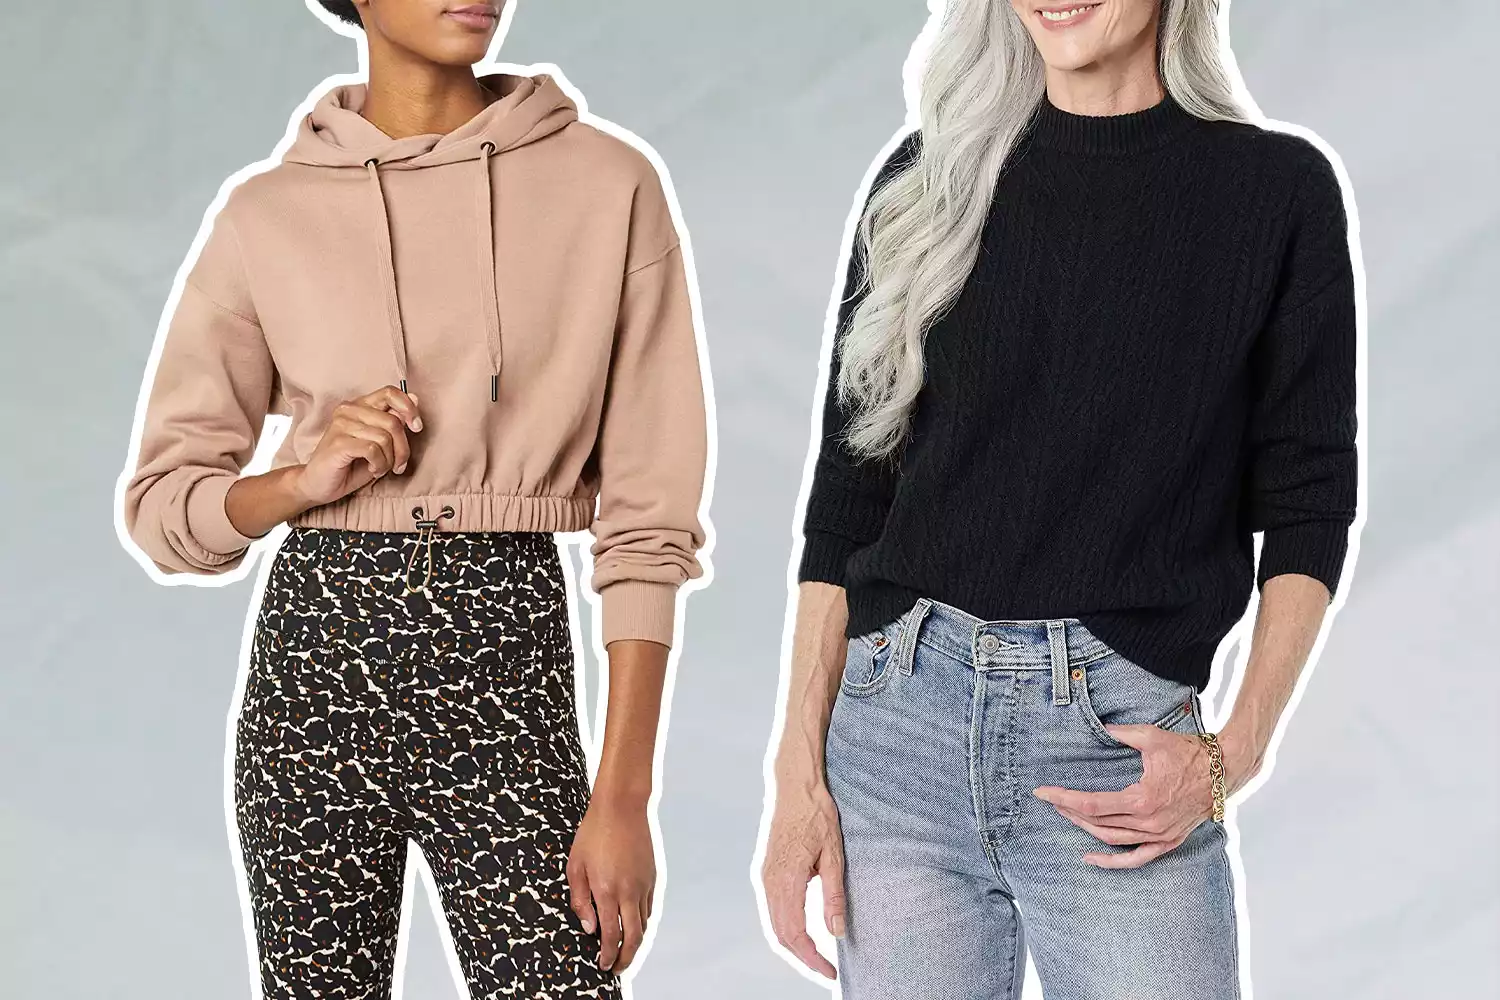 Standout Amazon Clothing Brands To Shop Now